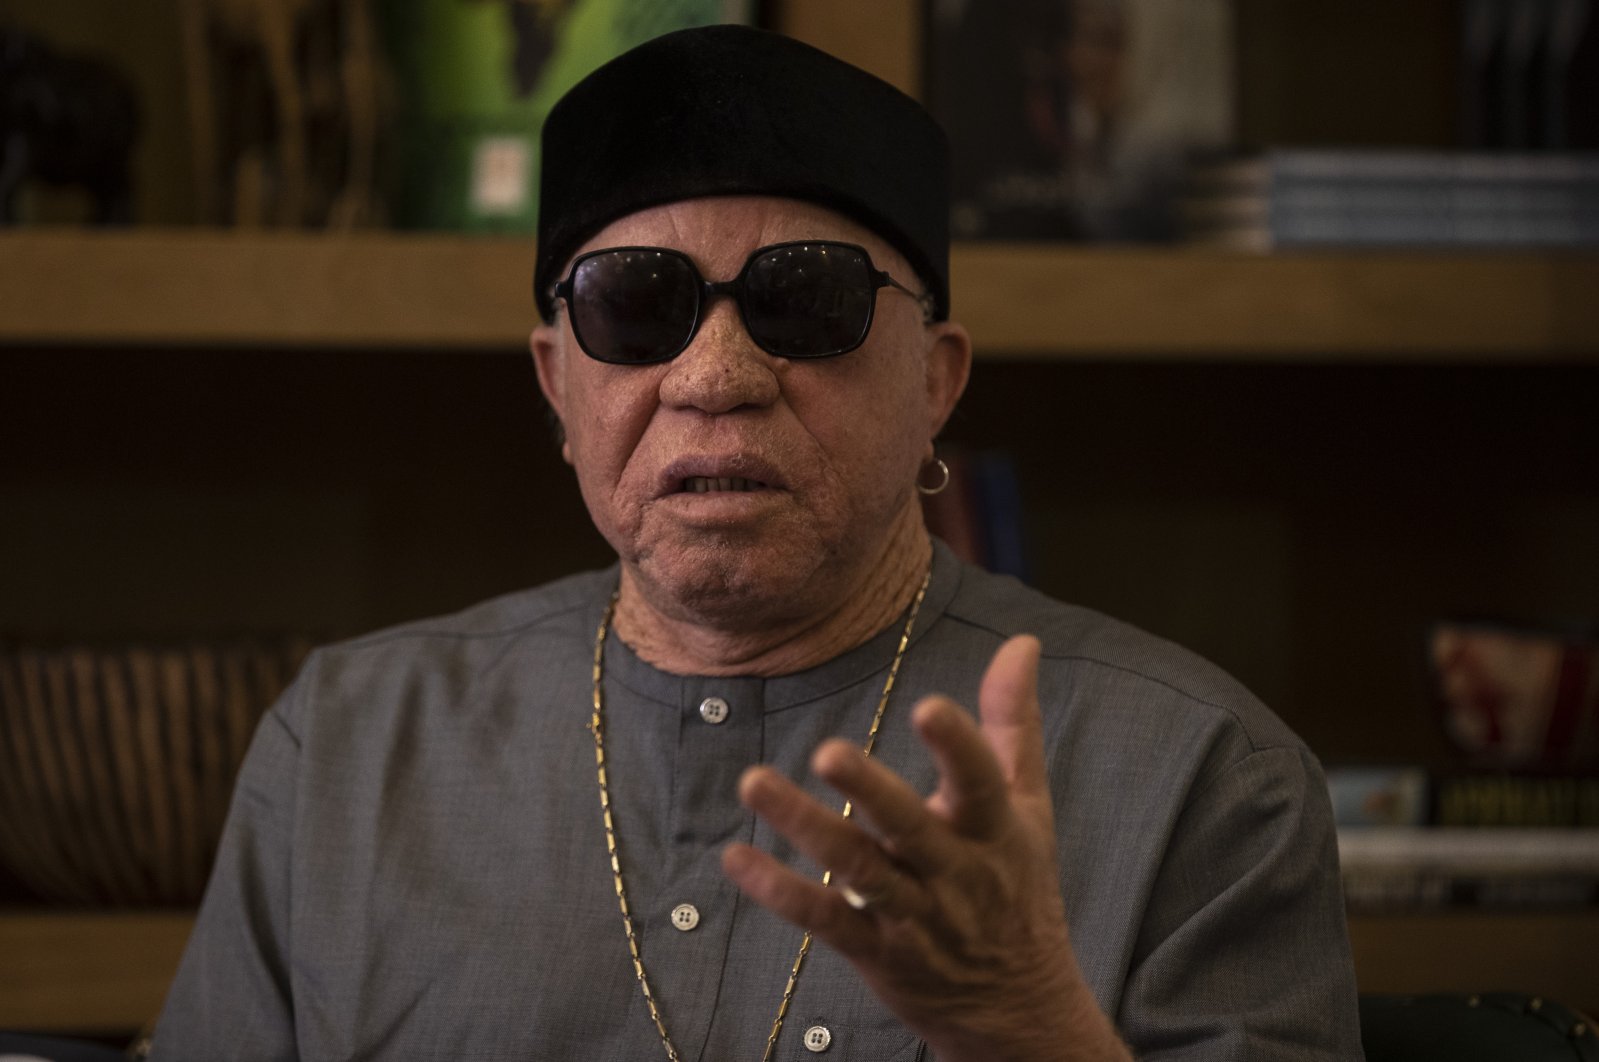 Artist Salif Keita, known as the &quot;golden voice of Africa,&quot; a grandson of Soundjata Keita, who founded the Mali Empire, held a press conference at Afrika House before his concert in Ankara, Turkey, June 3, 2022. (AA Photo)